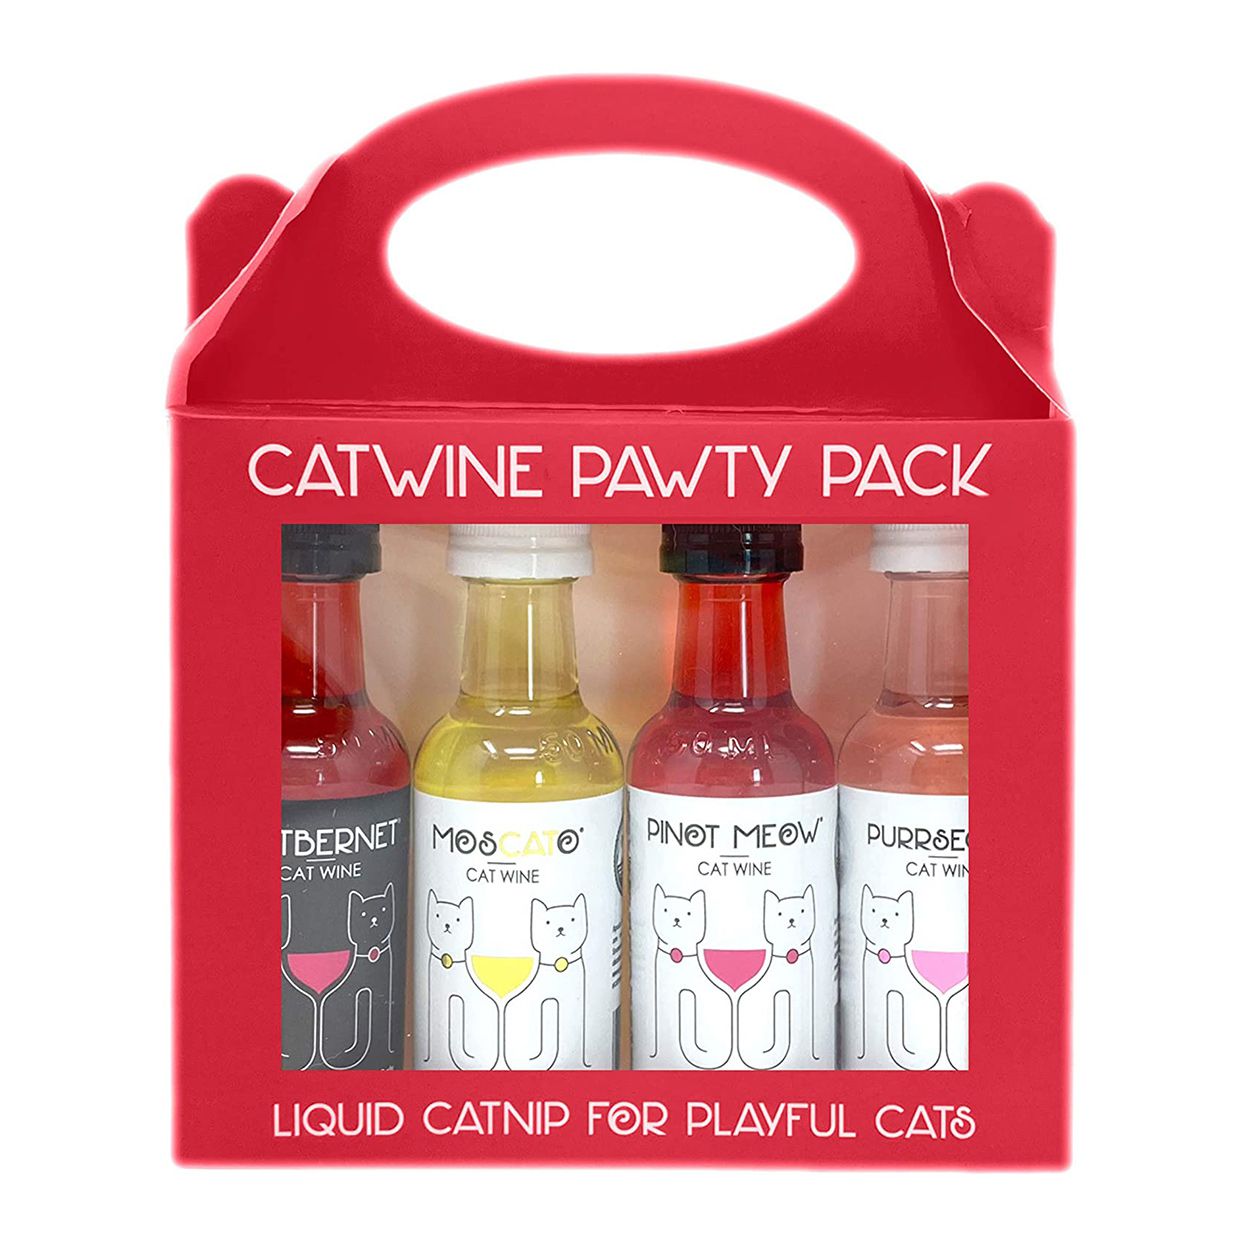 Product photo of a PetWineShop Cat Wine Pawty Pack on a white background